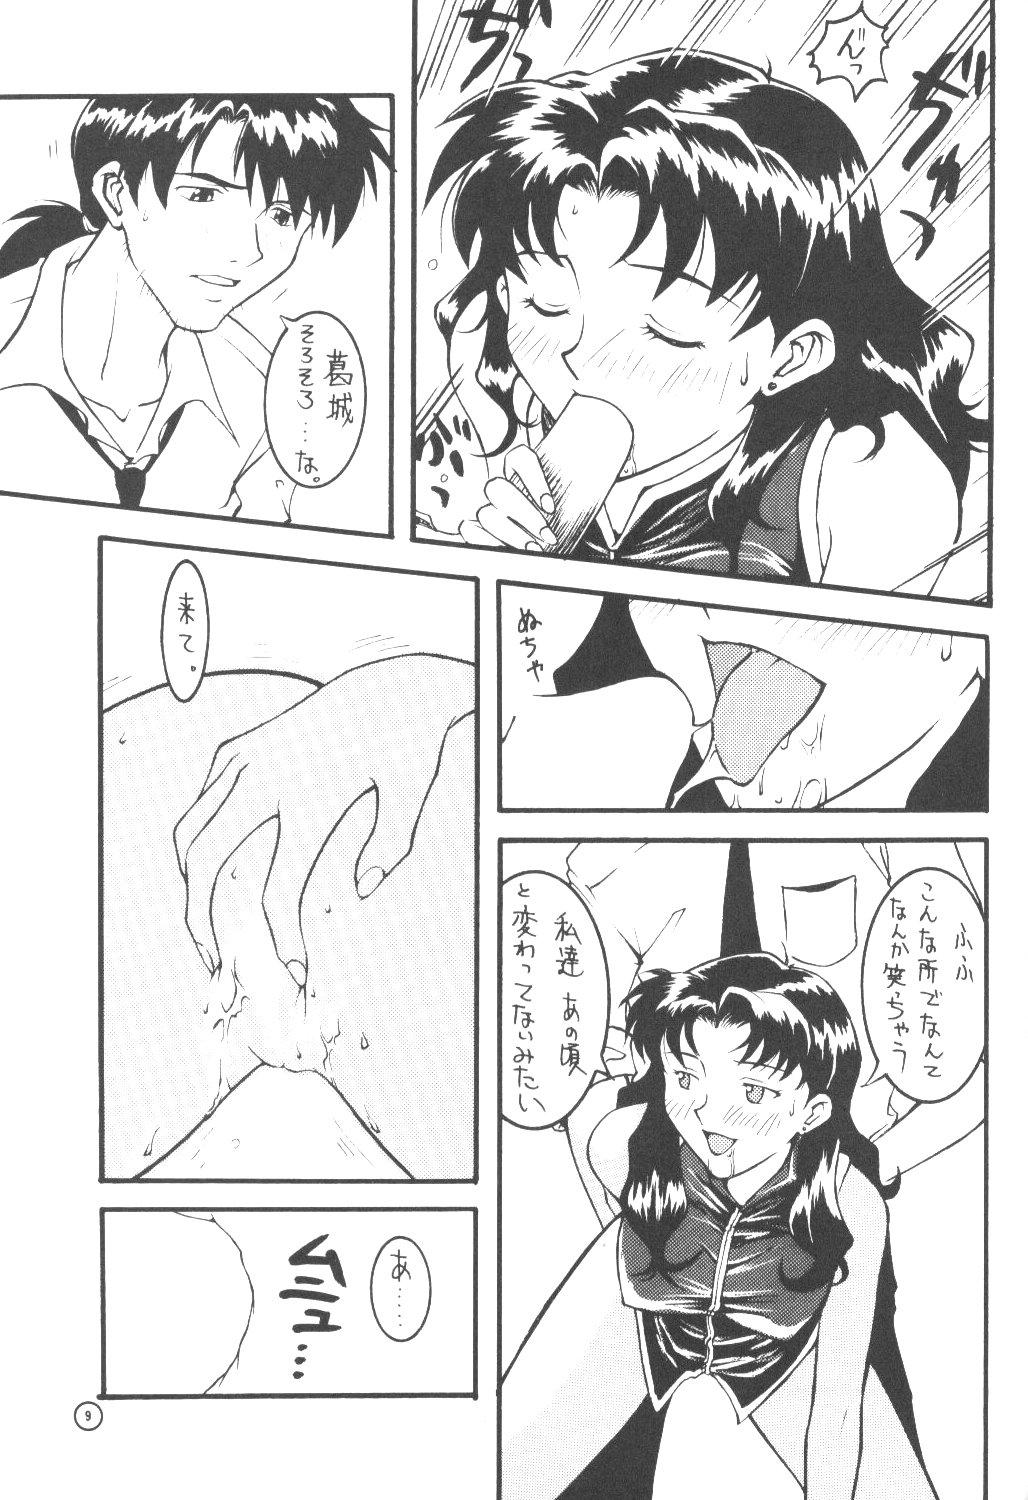 Pussylick End Max 8 Exit - Neon genesis evangelion Smoking - Page 8